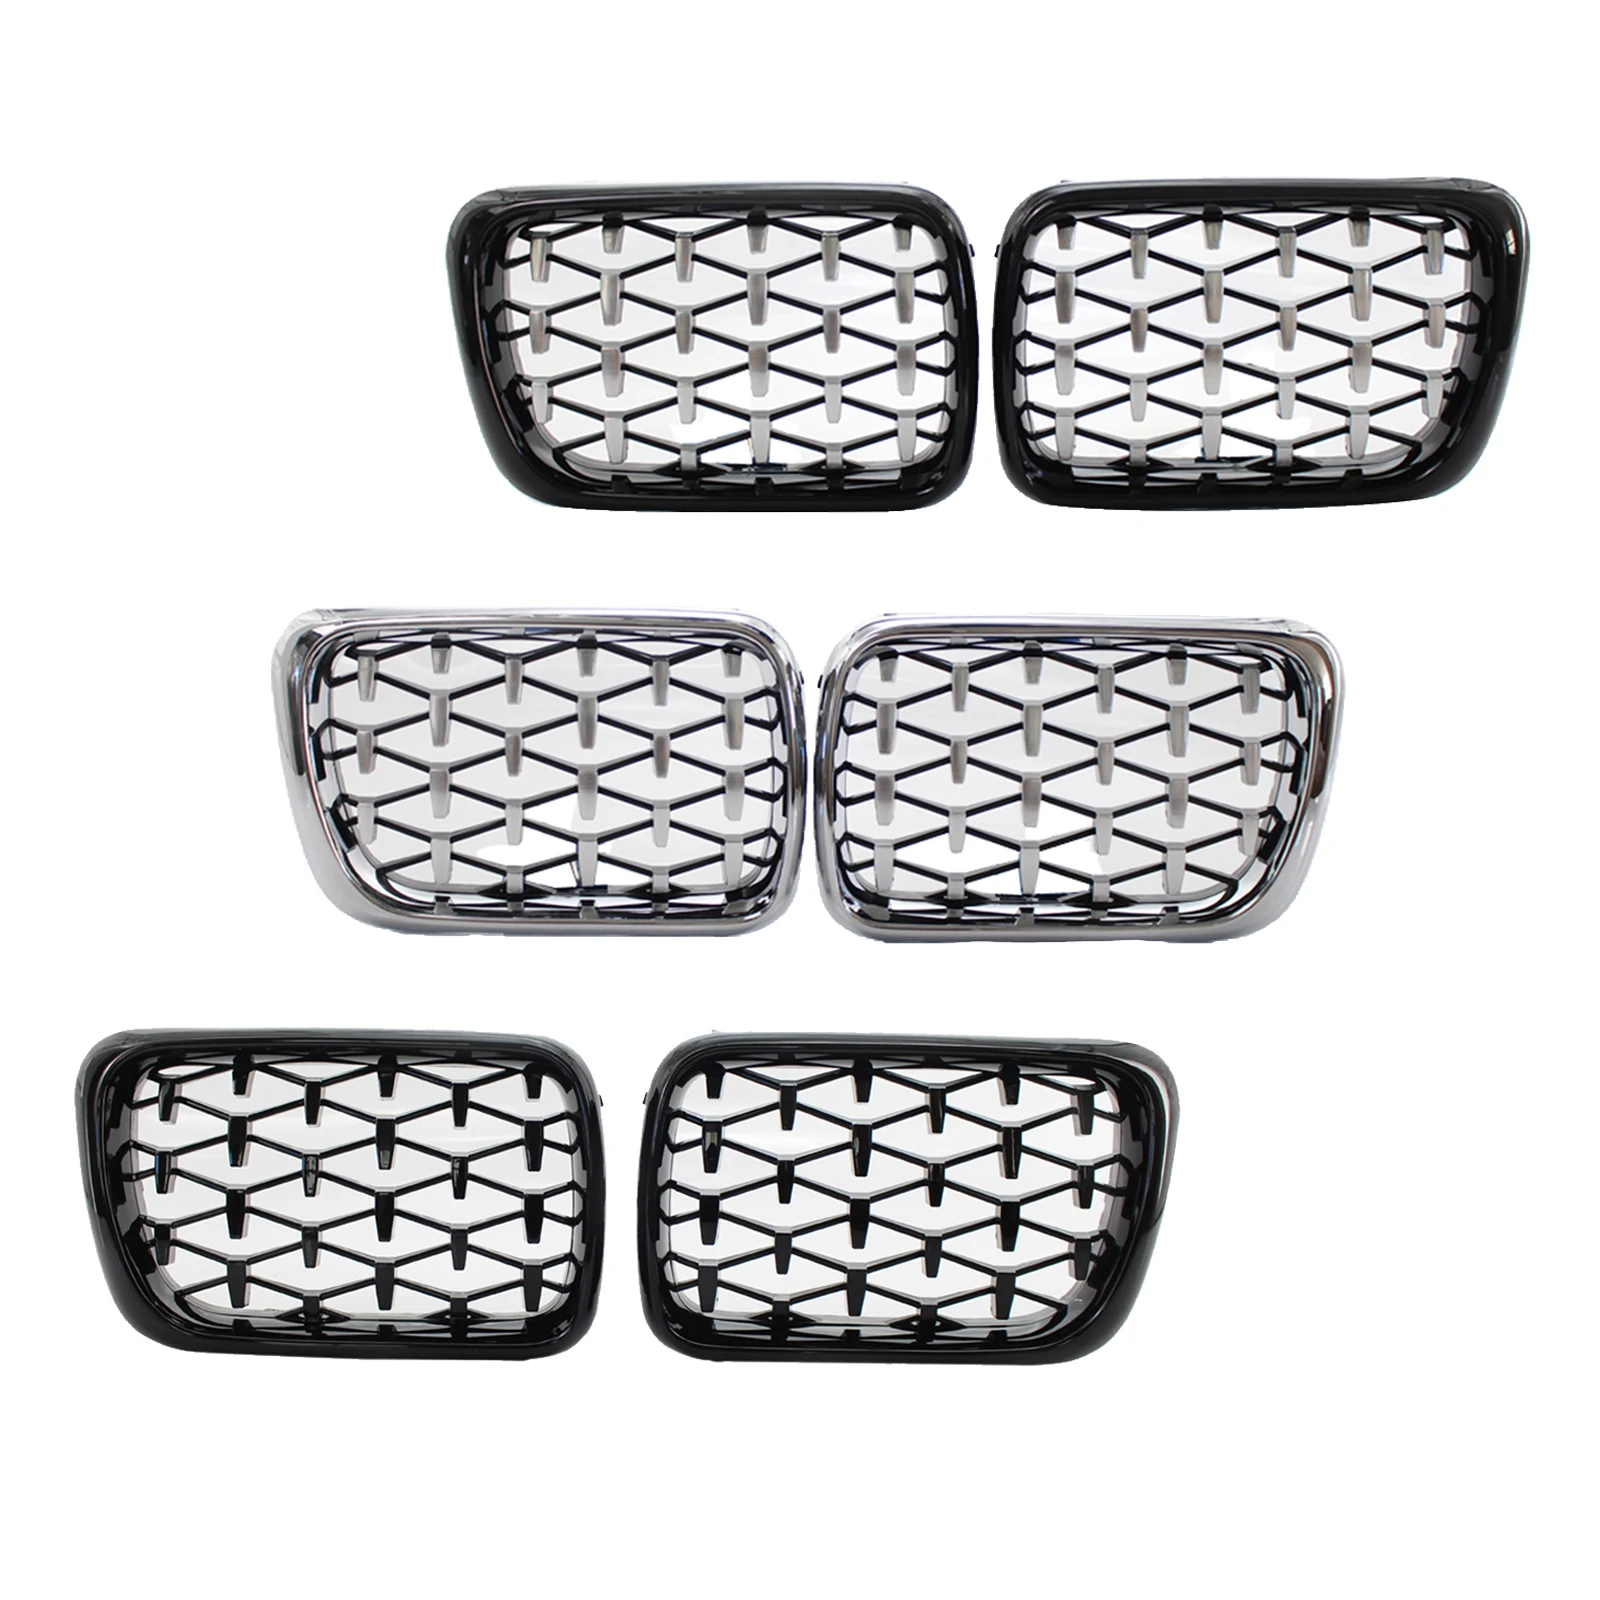 2 pcs Auto Car Front Bumper Kidney Grill for 997-1999, , Comes As A Pair.